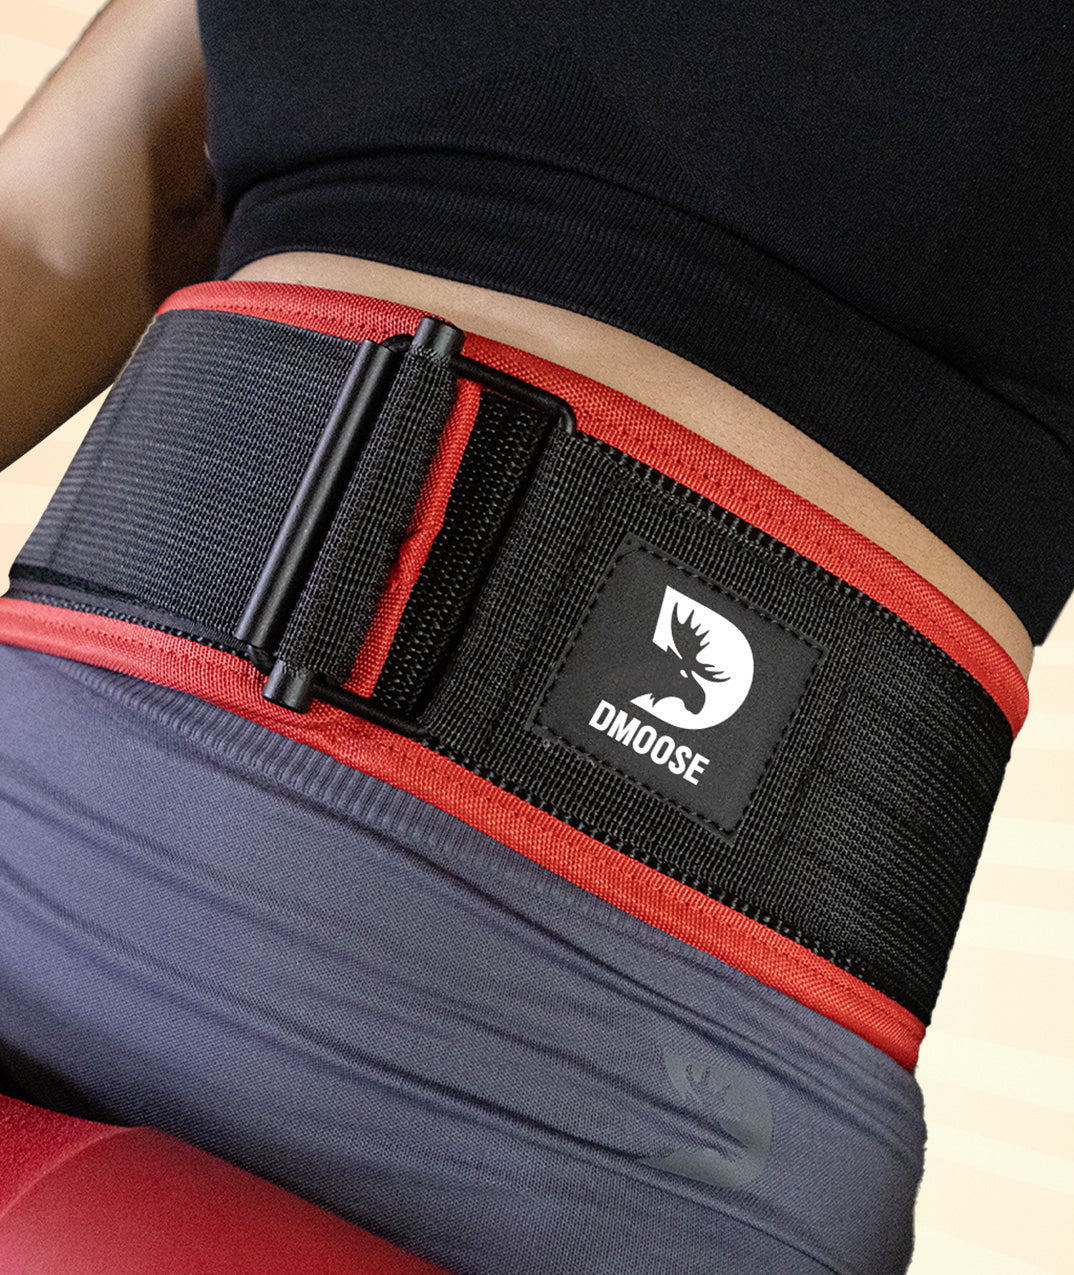 Experience the DMoose Nylon Weightlifting Belt - Lightweight & Durable